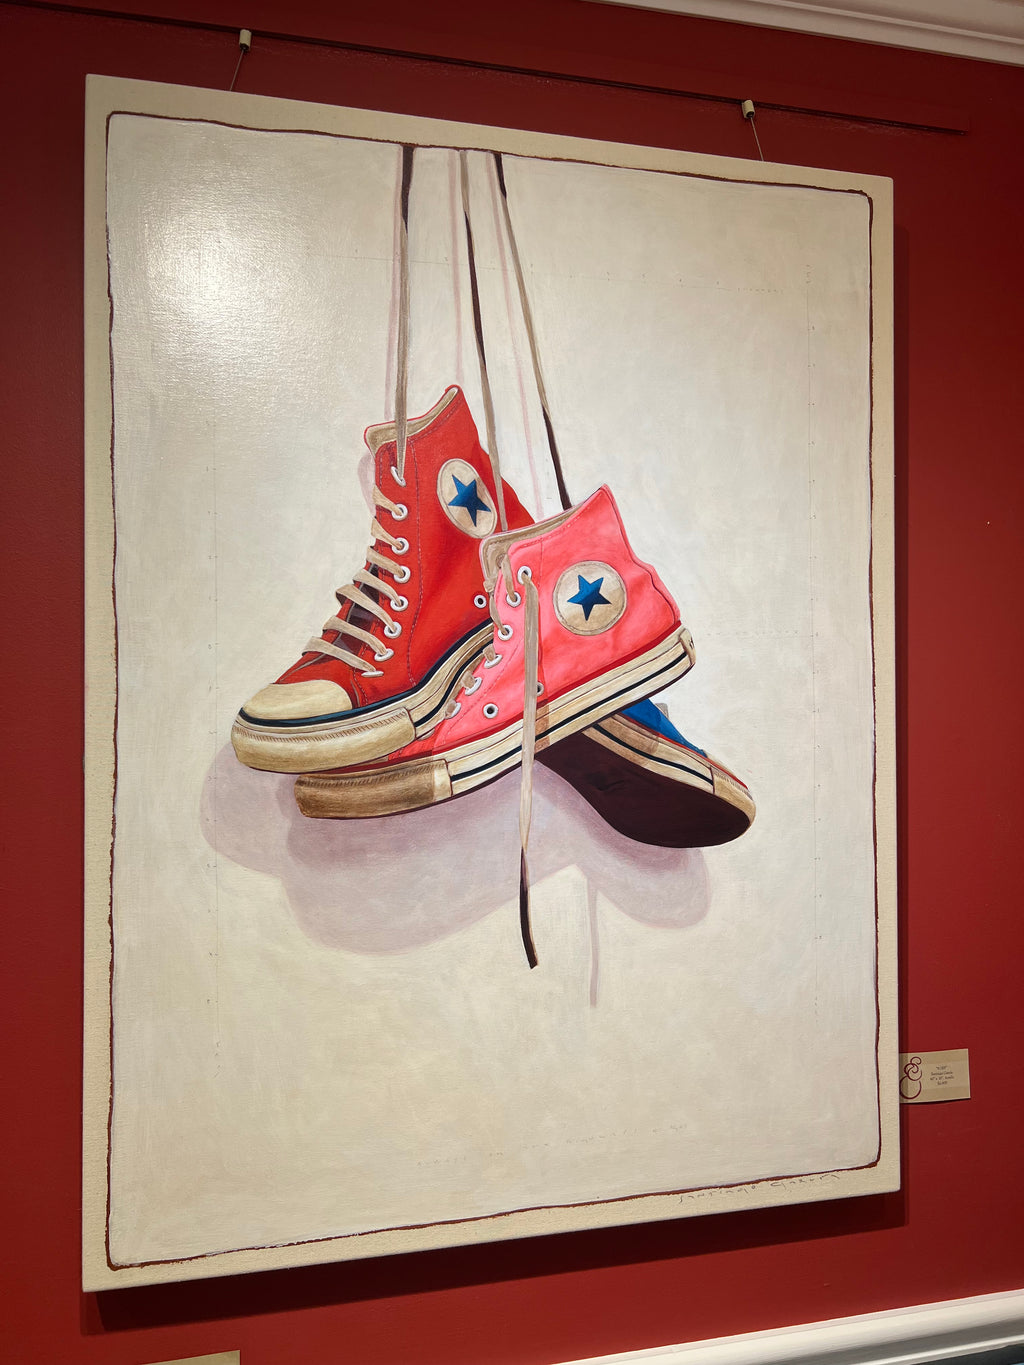 photorealistic oil painting of red, pink, and blue high top converse sneakers hanging by laces